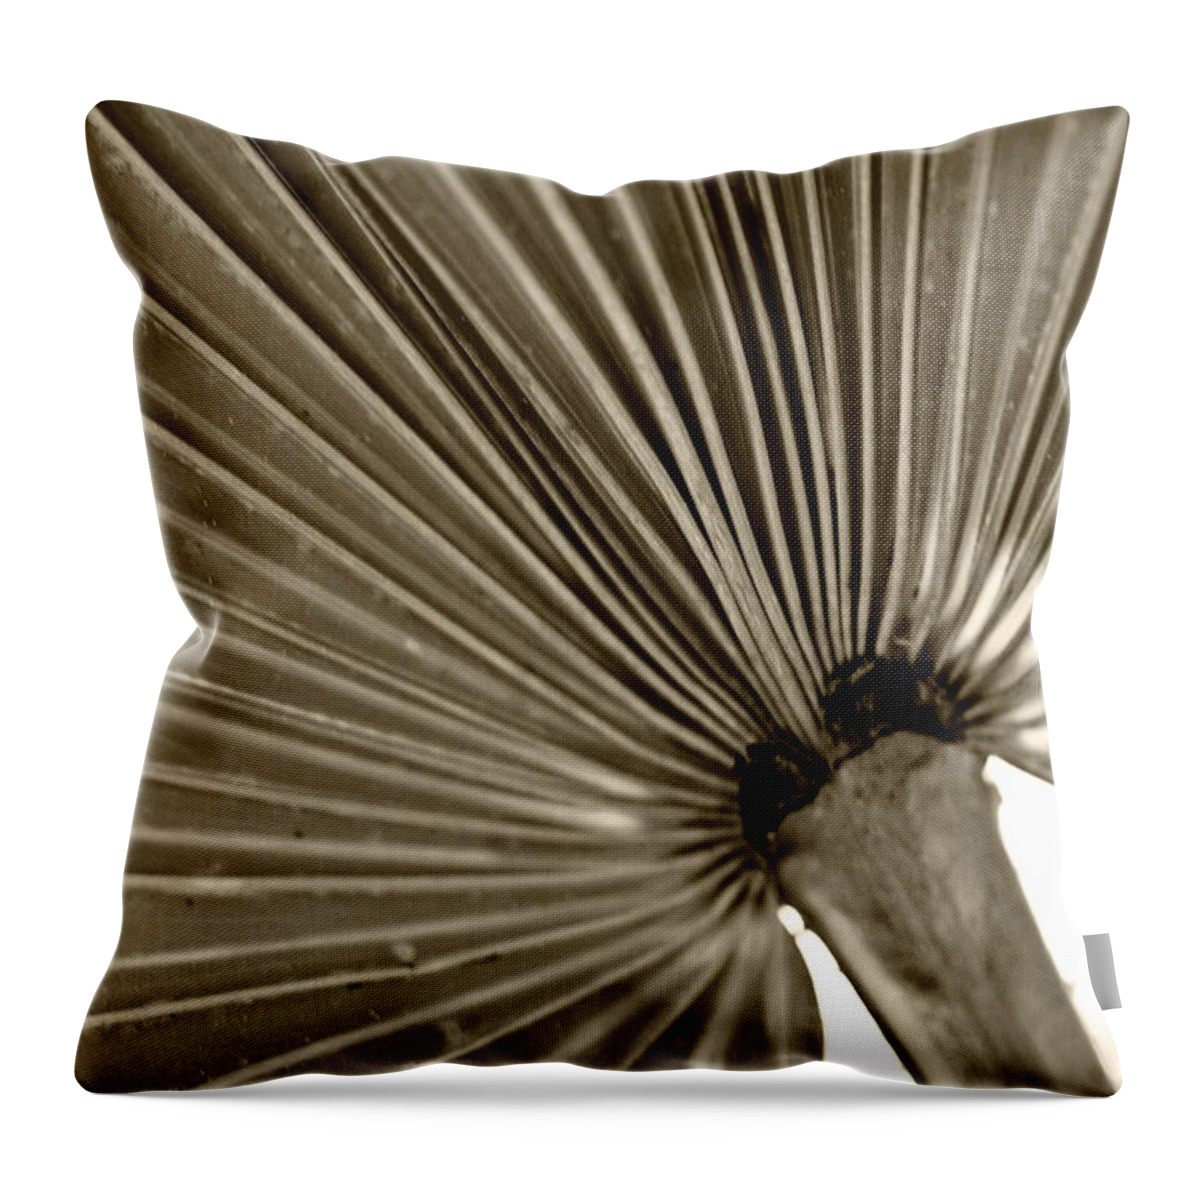 Botanical Throw Pillow featuring the photograph Fan Me by Melinda Ledsome